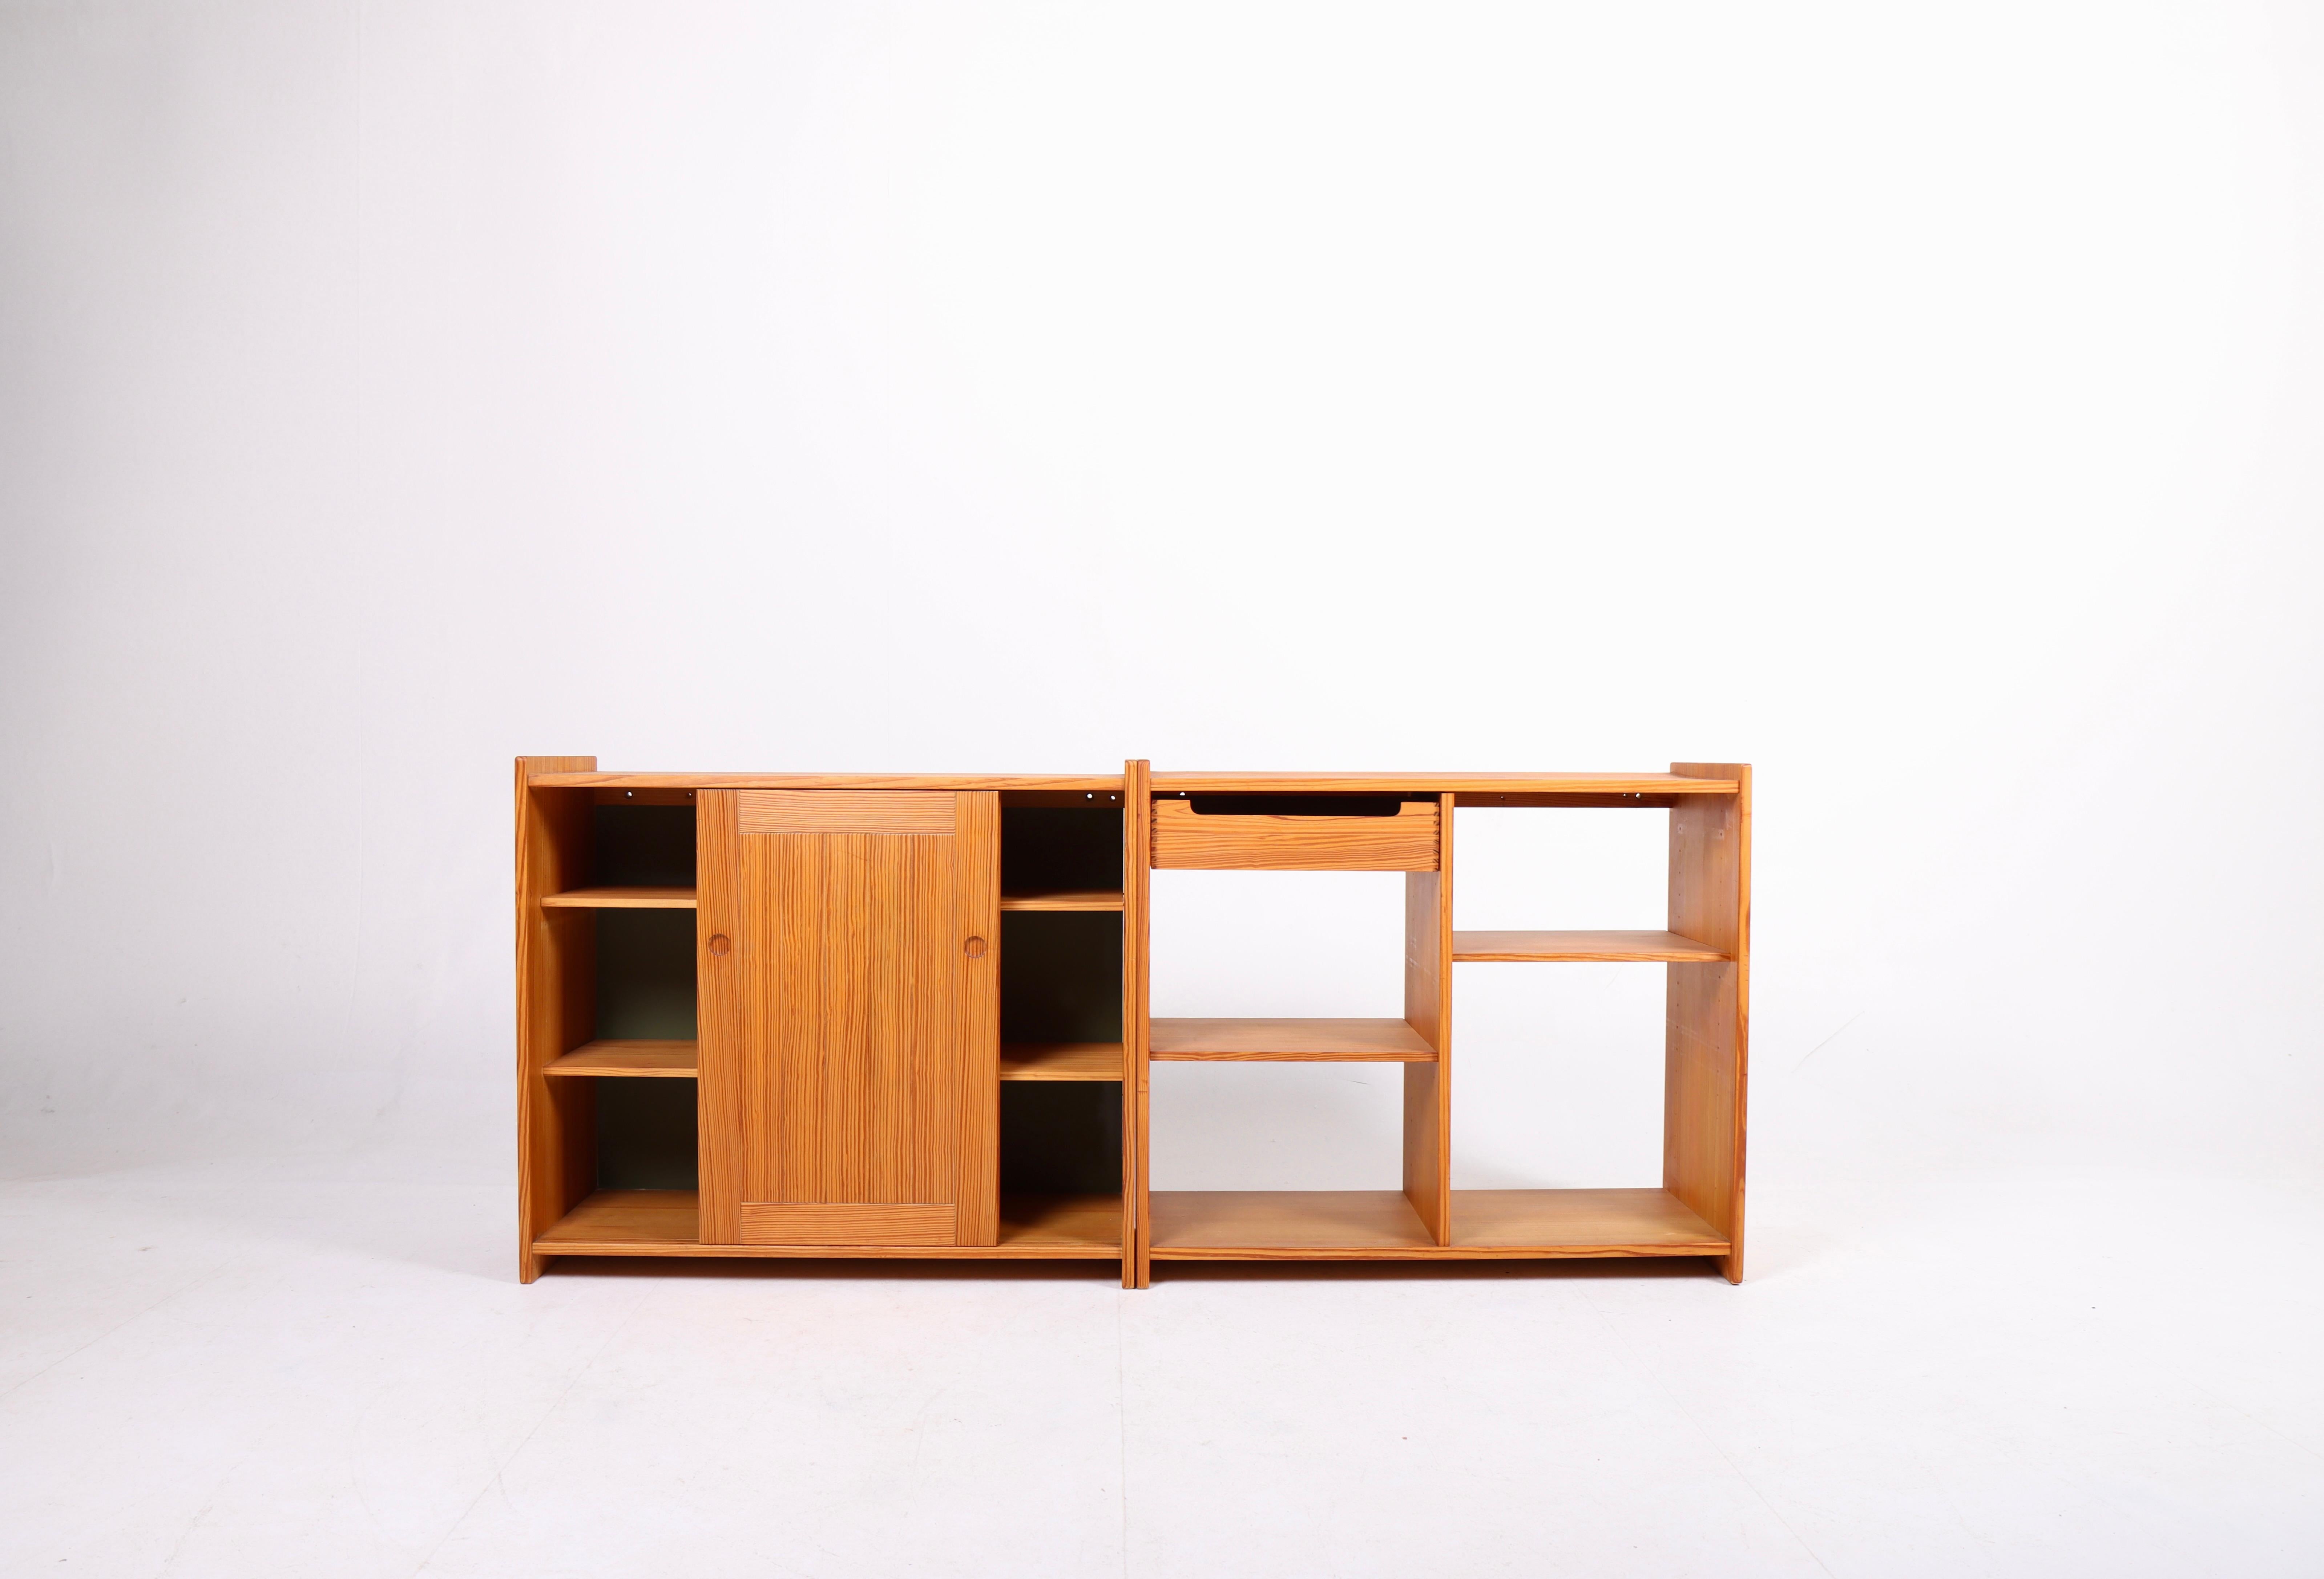 Wall-mounted cabinets in solid pine. Designed by Bernt Petersen in 1970s. Made in Denmark. Great original condition.